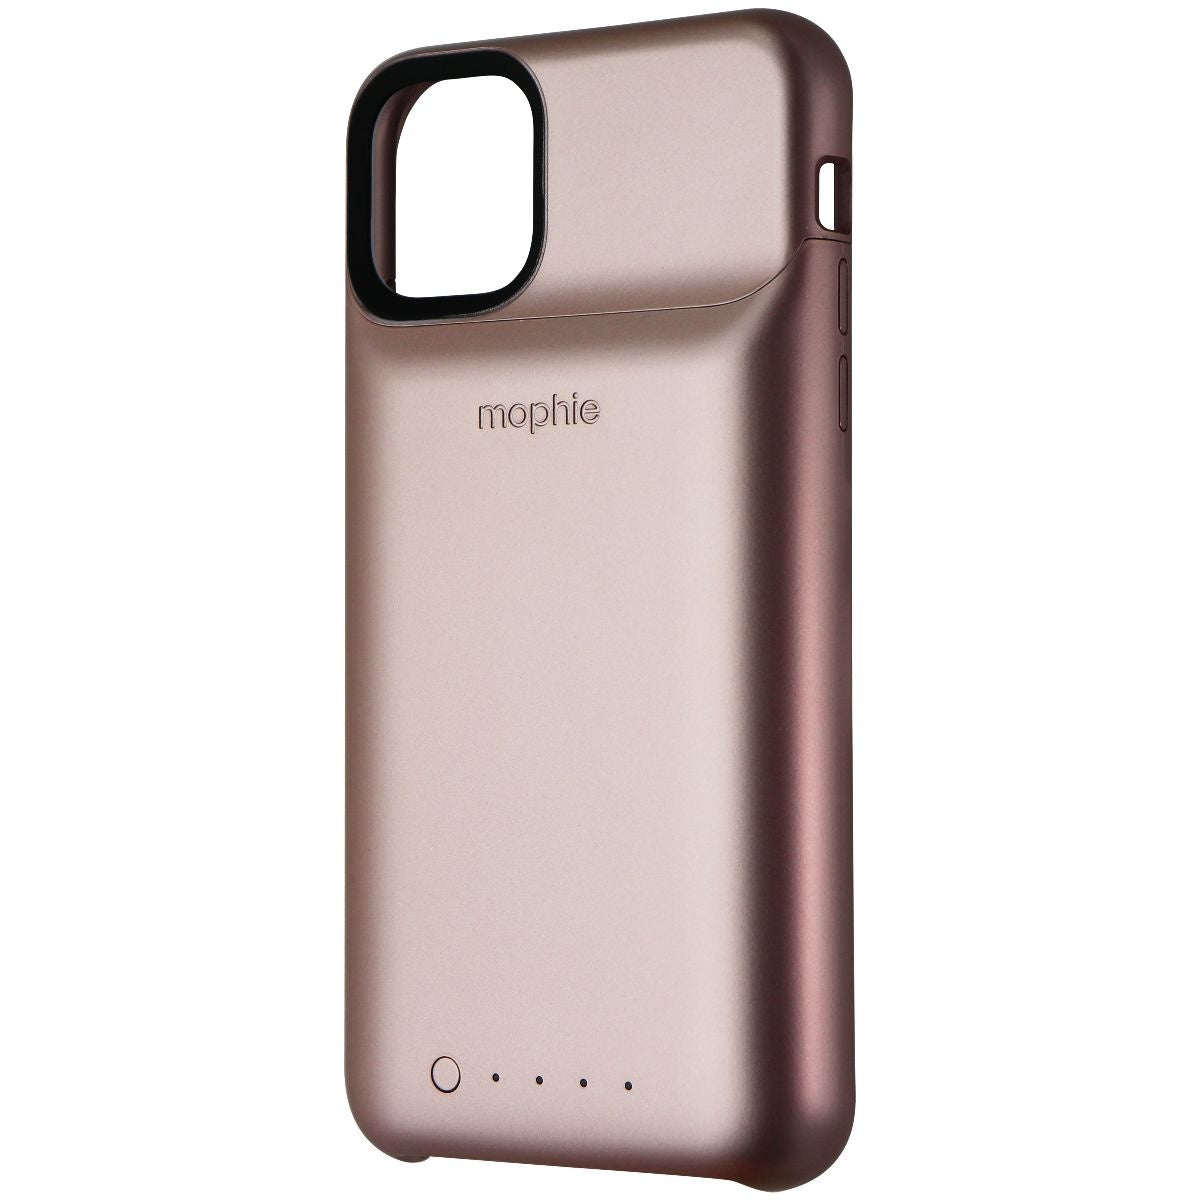 mophie Juice Pack Access 2200 mAh Battery Case for iPhone 11 Pro Max - Pink